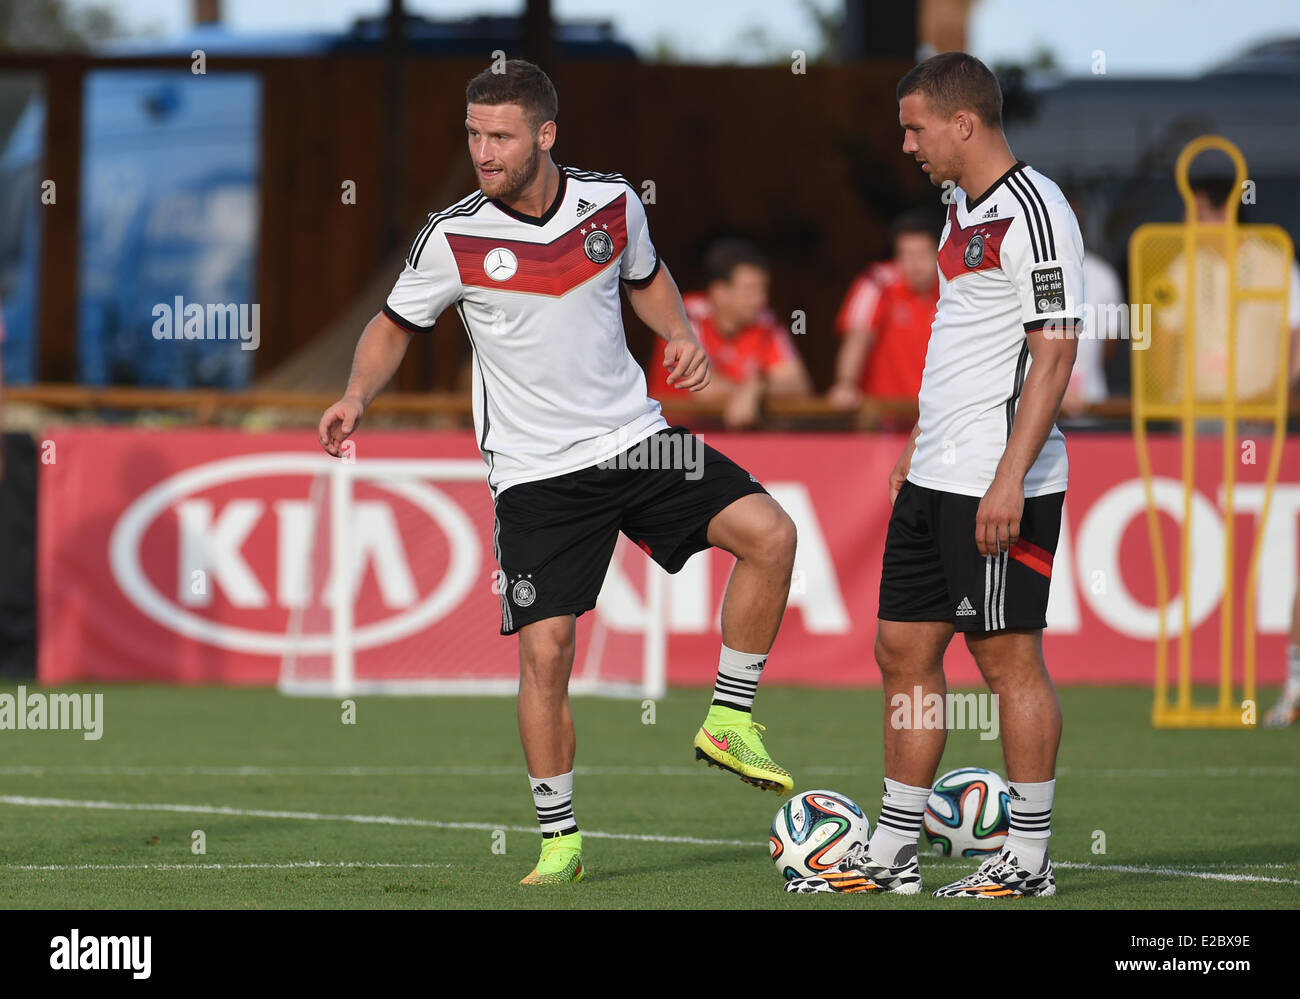 Santo Andre, Brazil. 18th June, 2014. Shkodran Mustafi (L) and Lukas Podolski in action during a training session of the German national soccer team in Santo Andre, Brazil, 18 June 2014. Photo: Andreas Gebert/dpa/Alamy Live News Stock Photo